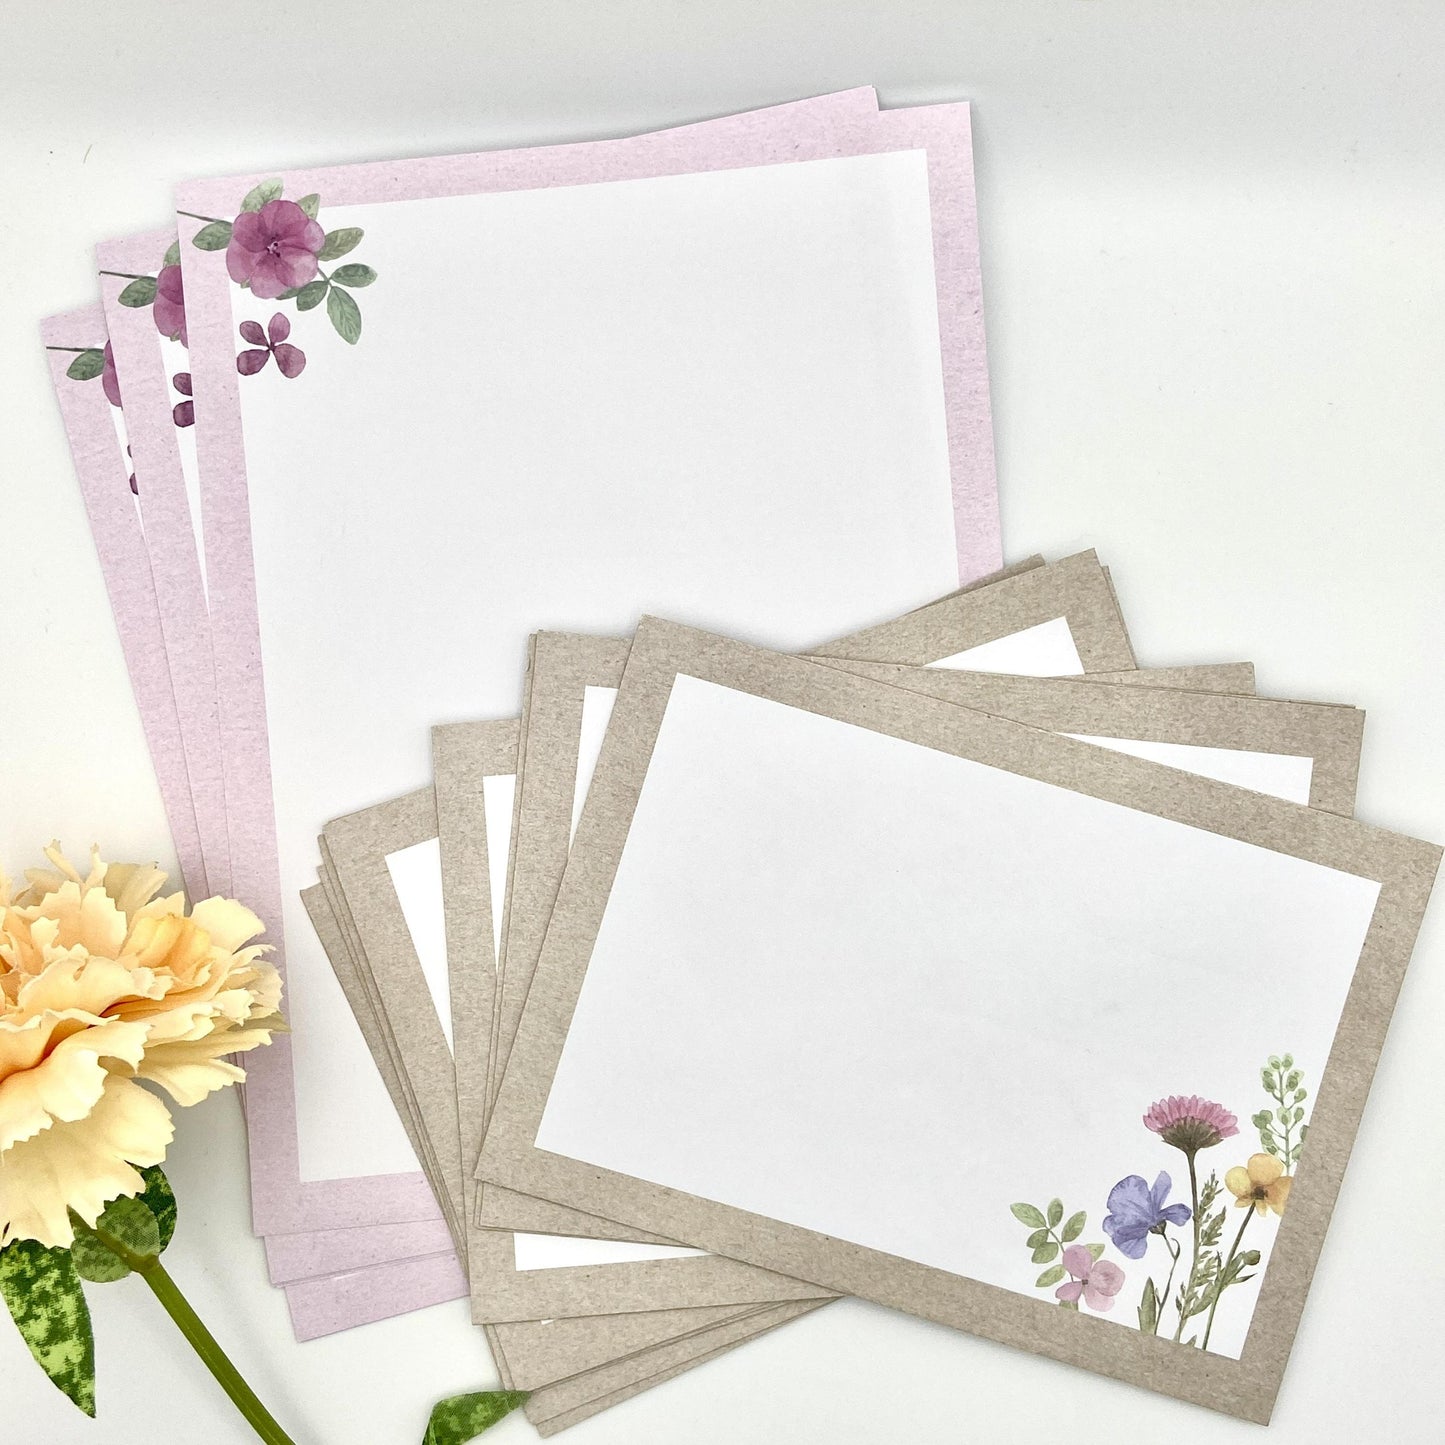 Inside Image Showing Writing Paper And Floral Envelopes